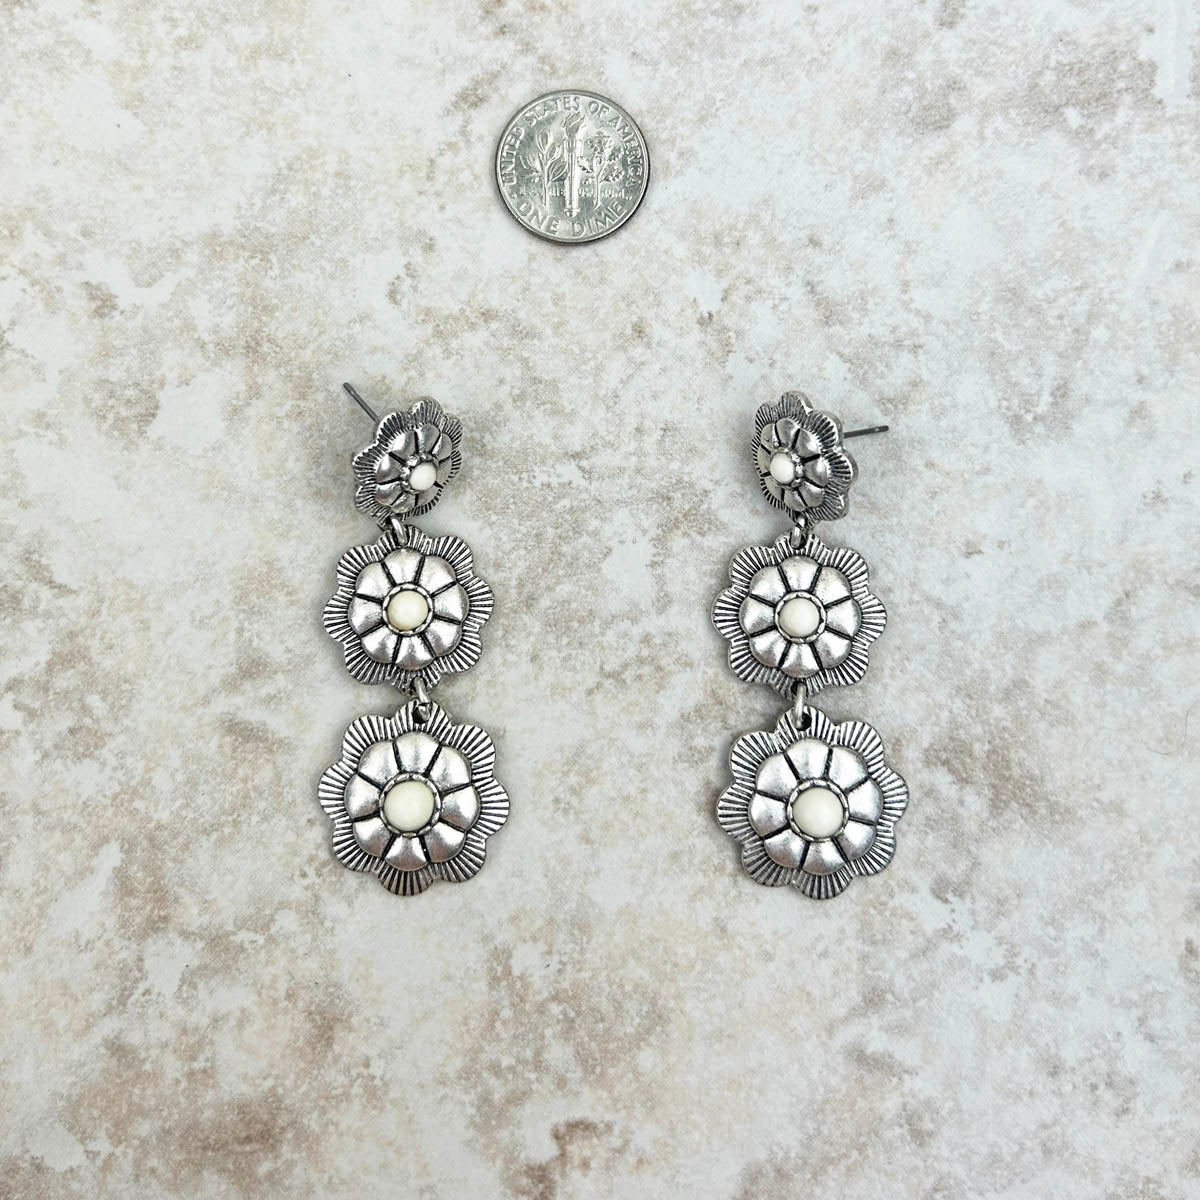 Silver Natural Stone Center Flower Concho Dangle Earrings - Montana West World